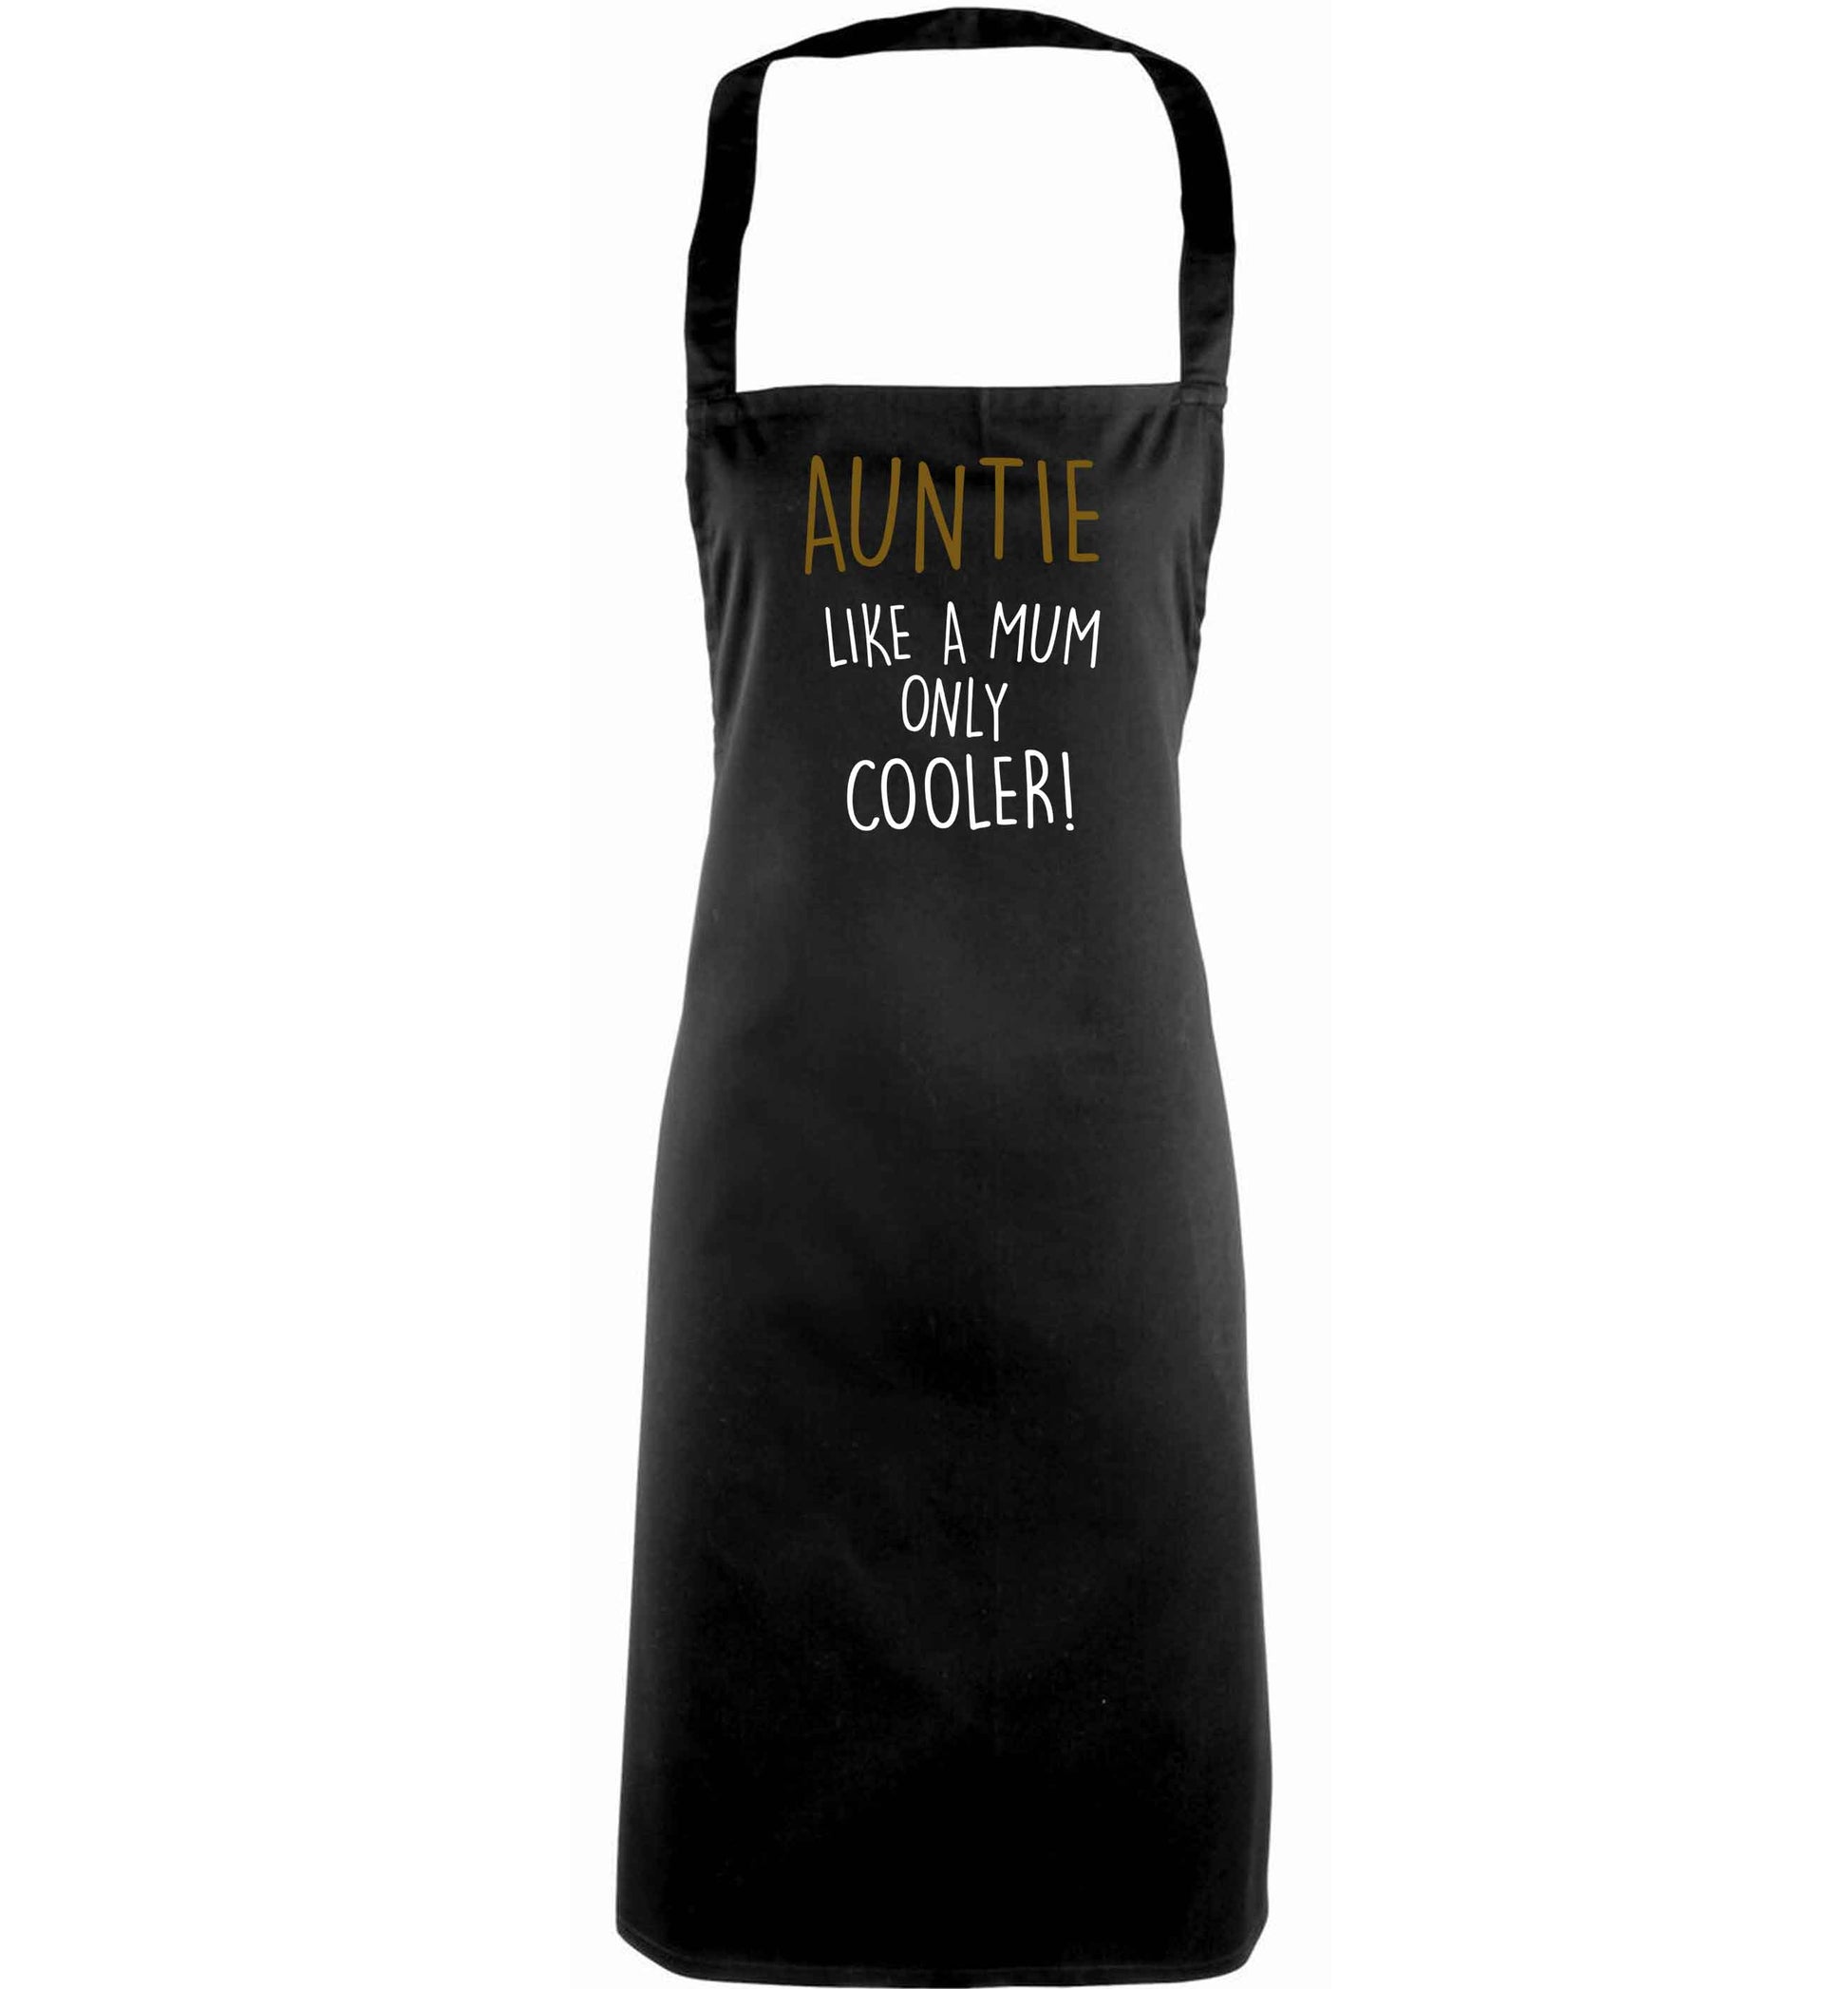 Auntie like a mum only cooler adults black apron